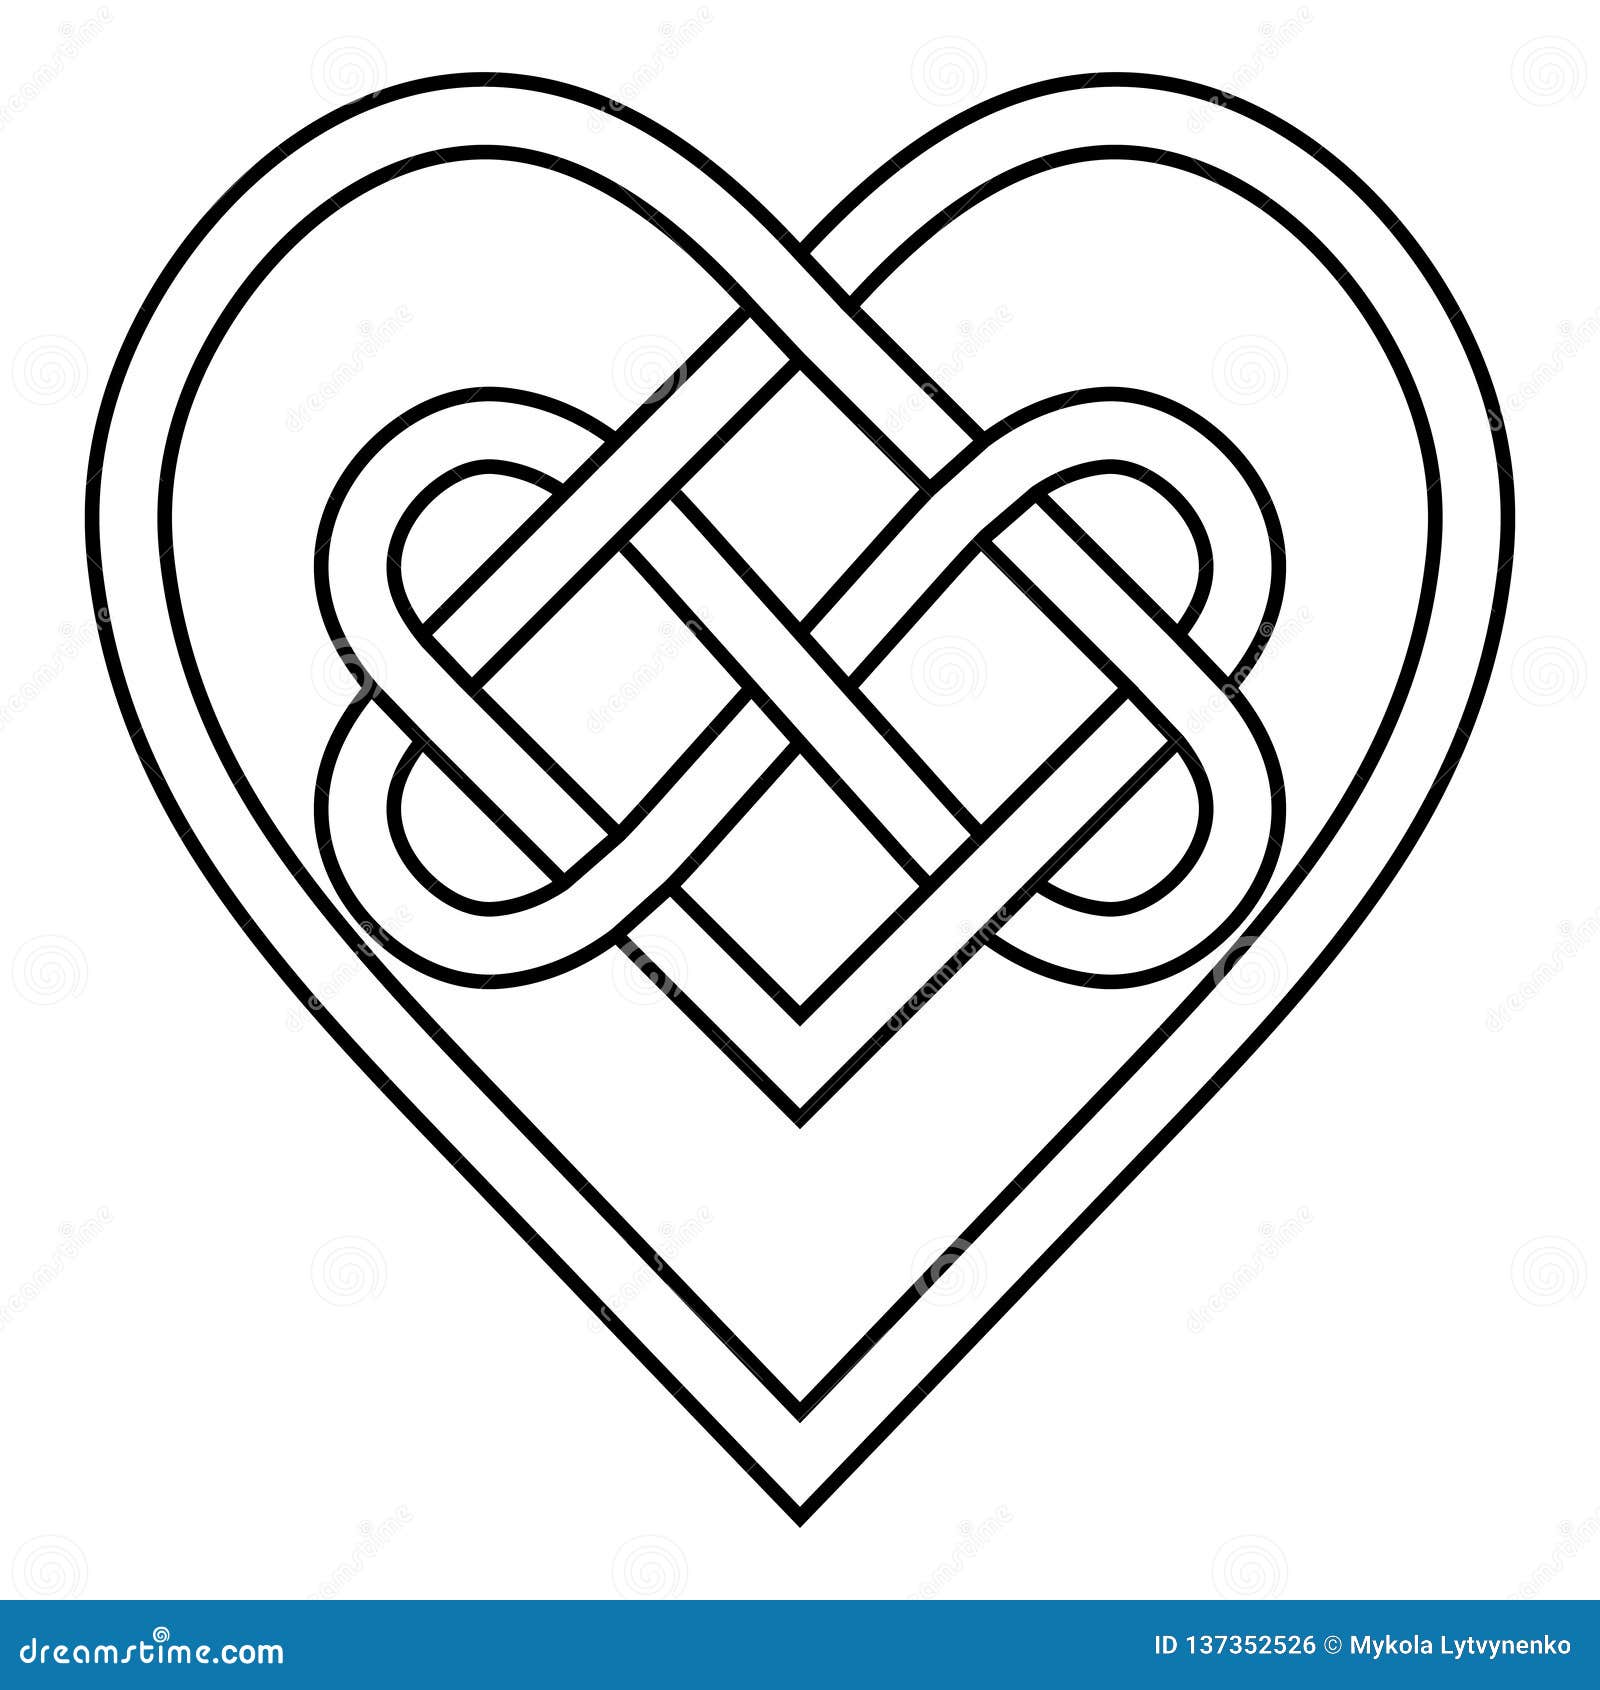 Celtic Knot Rune Bound Hearts Infinity Vector Symbol Sign of Eternal Love,  Tattoo Logo Pattern of Hearts Stock Vector - Illustration of abstract,  boud: 137352526